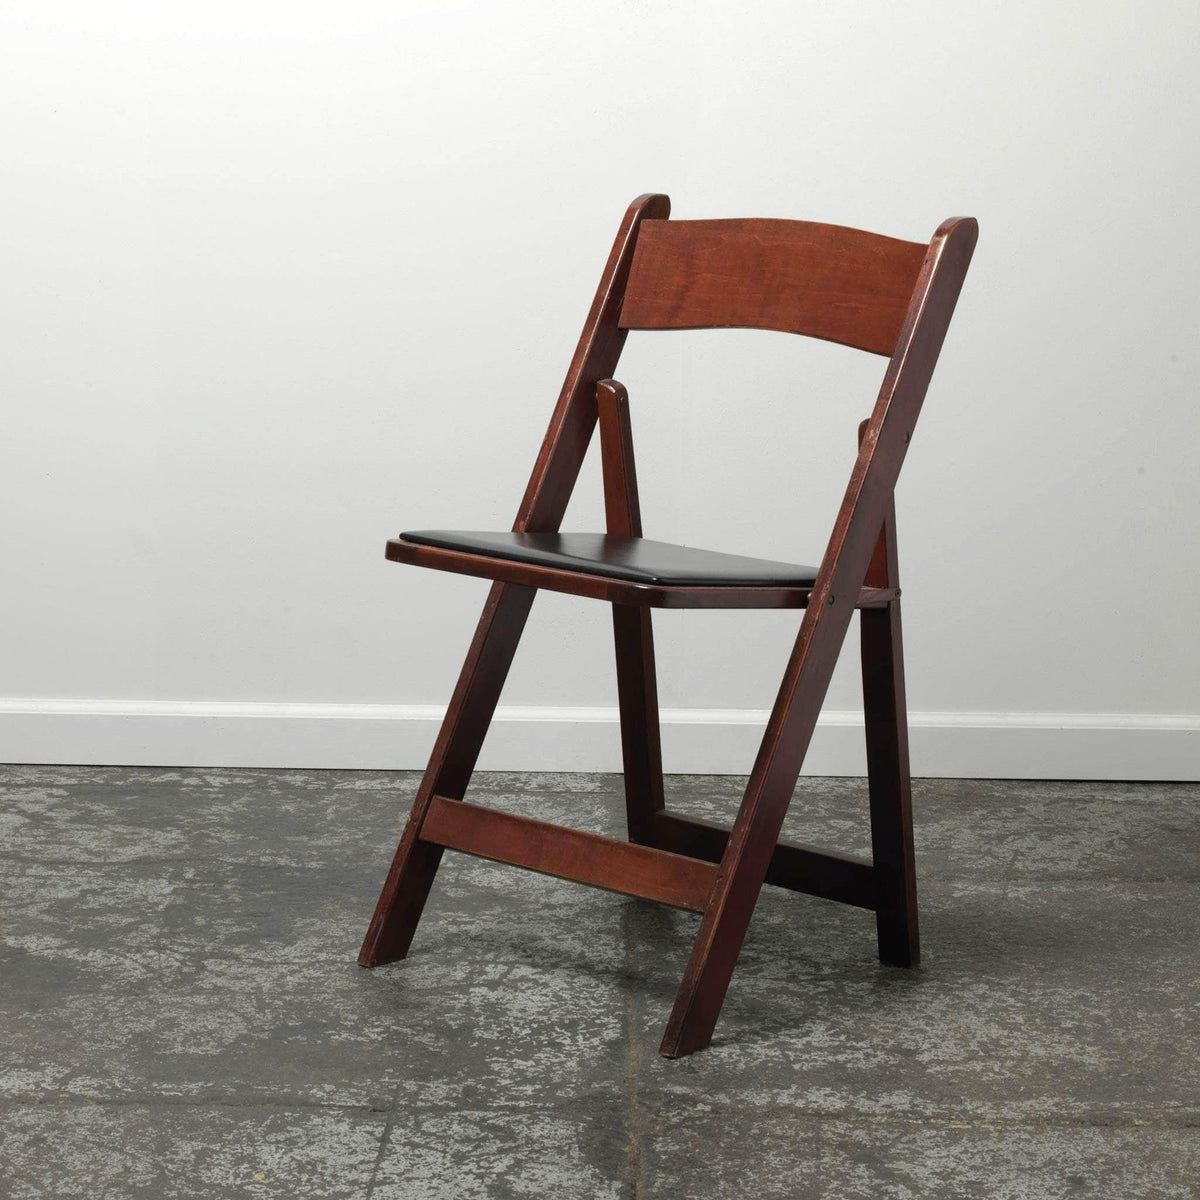 Mahogany Wooden Folding Chair with Padded Seat